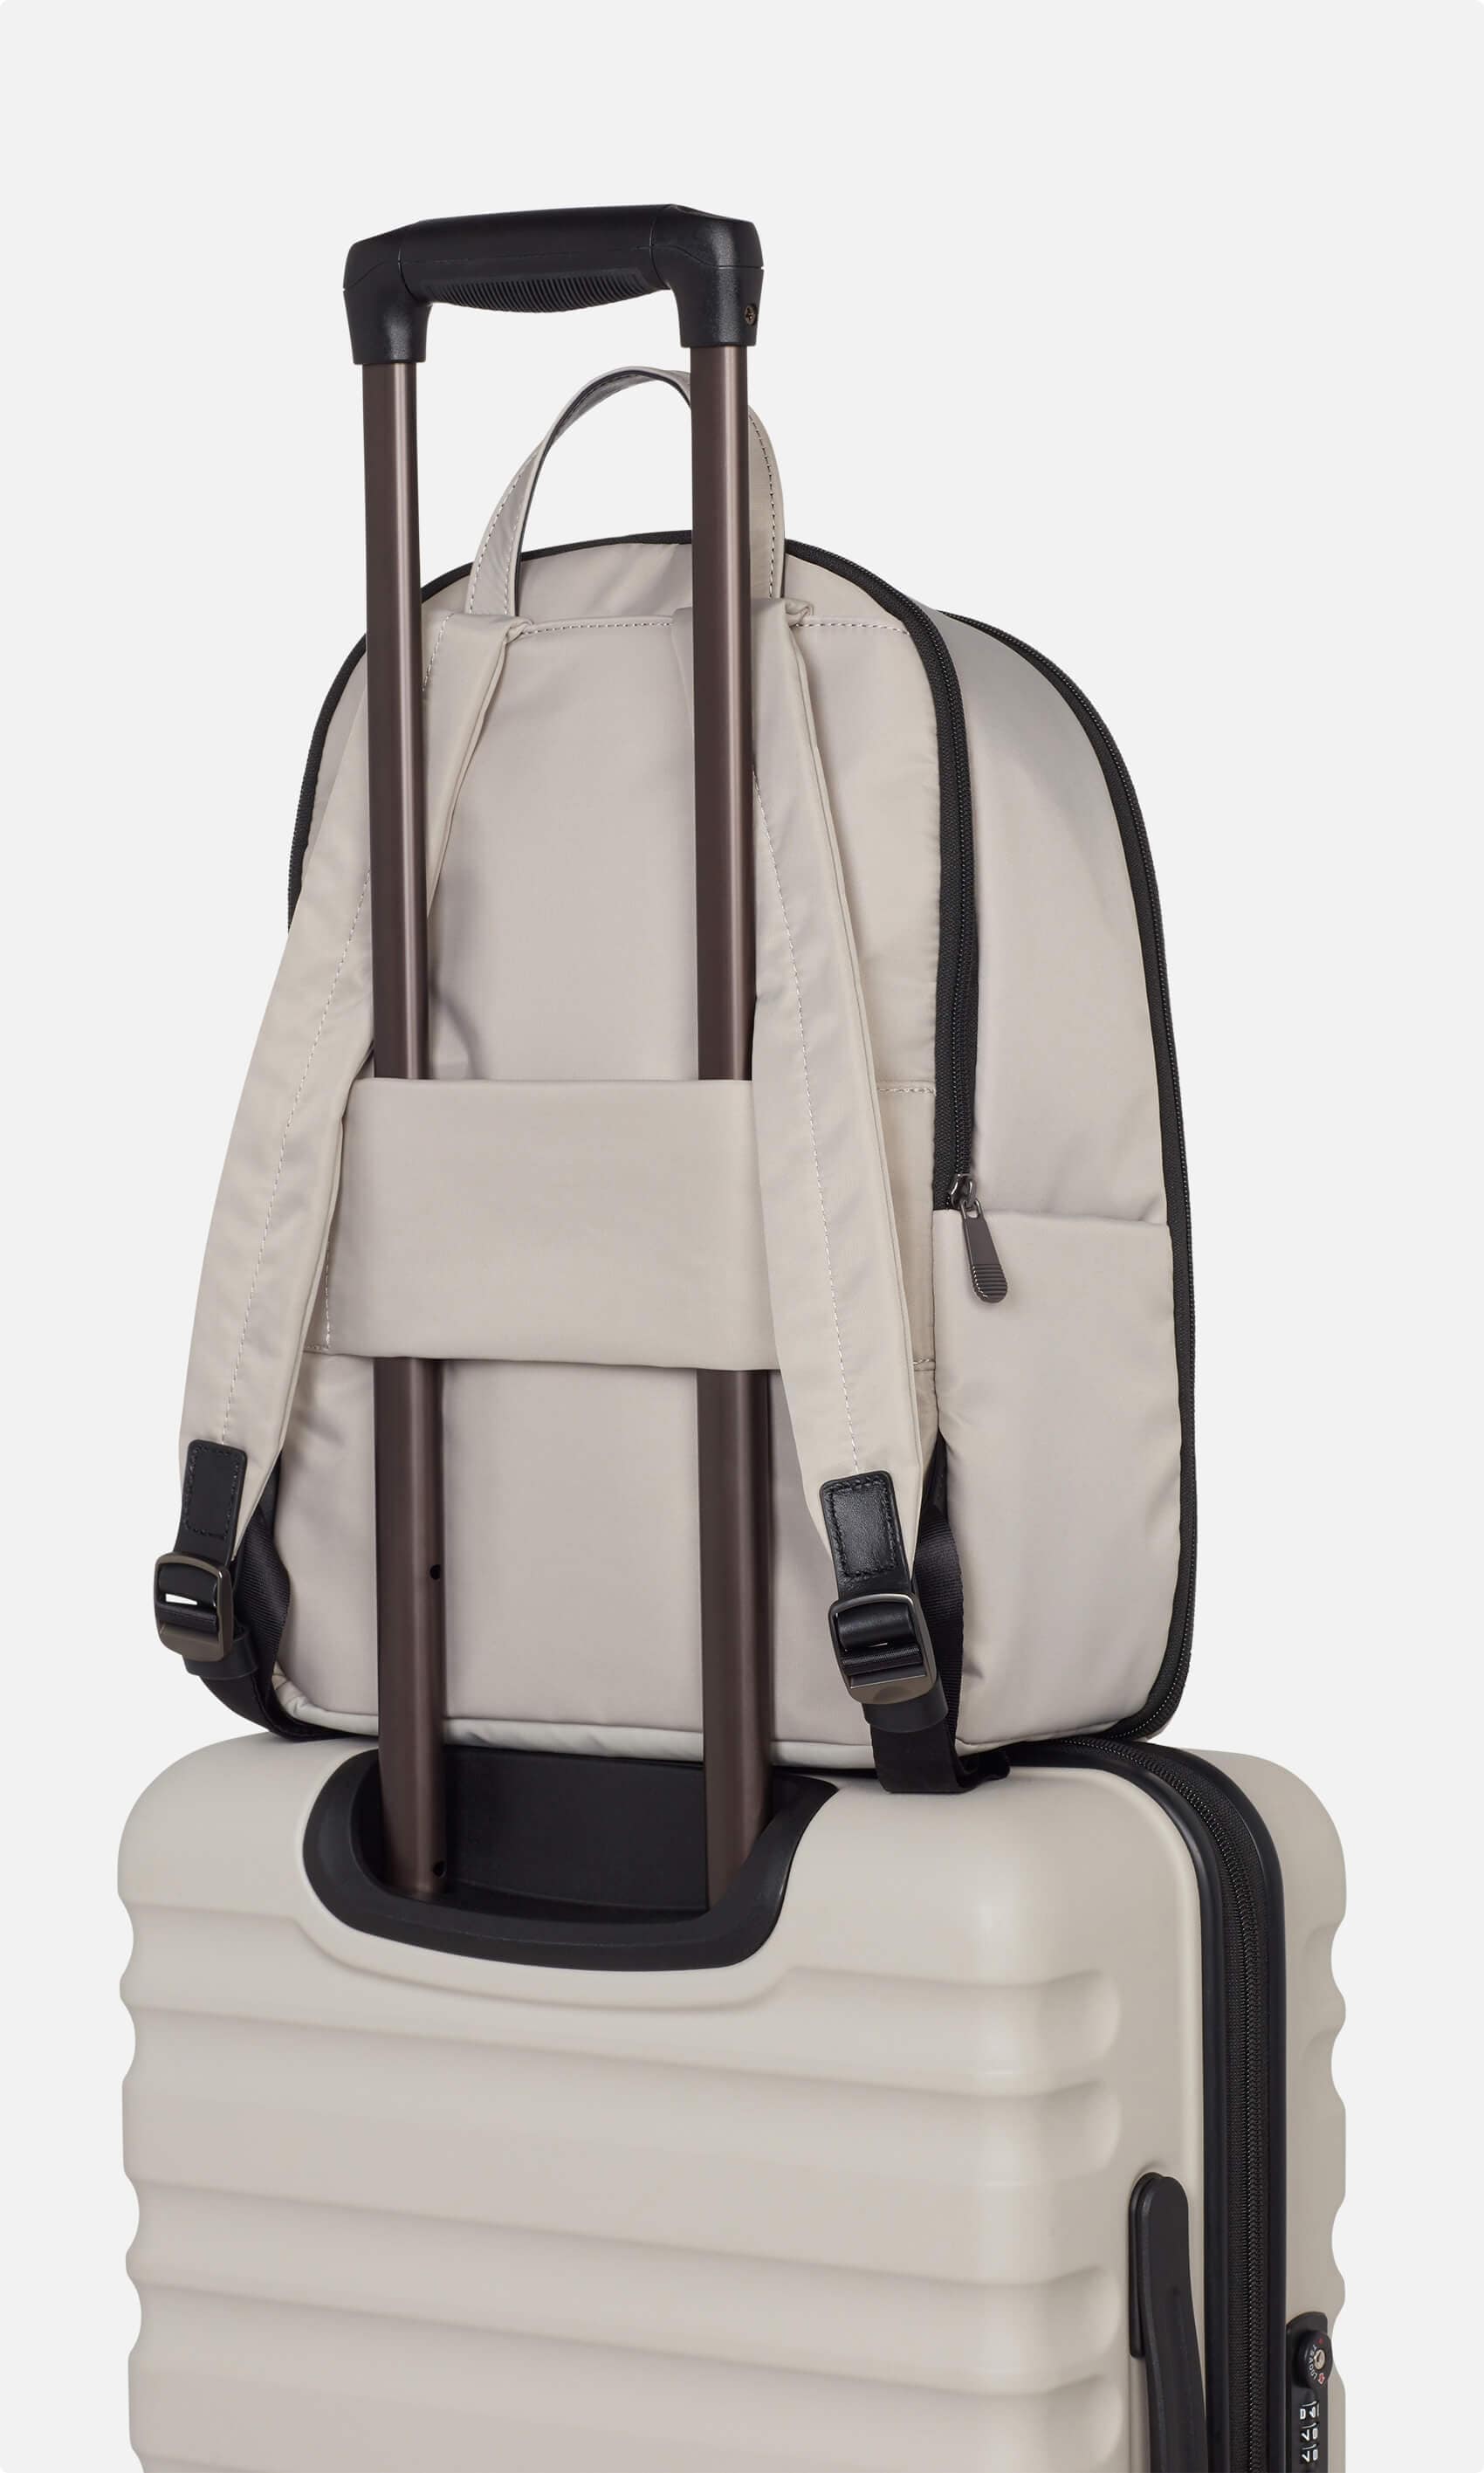 Antler Luggage -  Chelsea large backpack in taupe - Backpacks Chelsea Backpack Taupe (Beige) | Travel & Lifestyle Bags | Antler UK